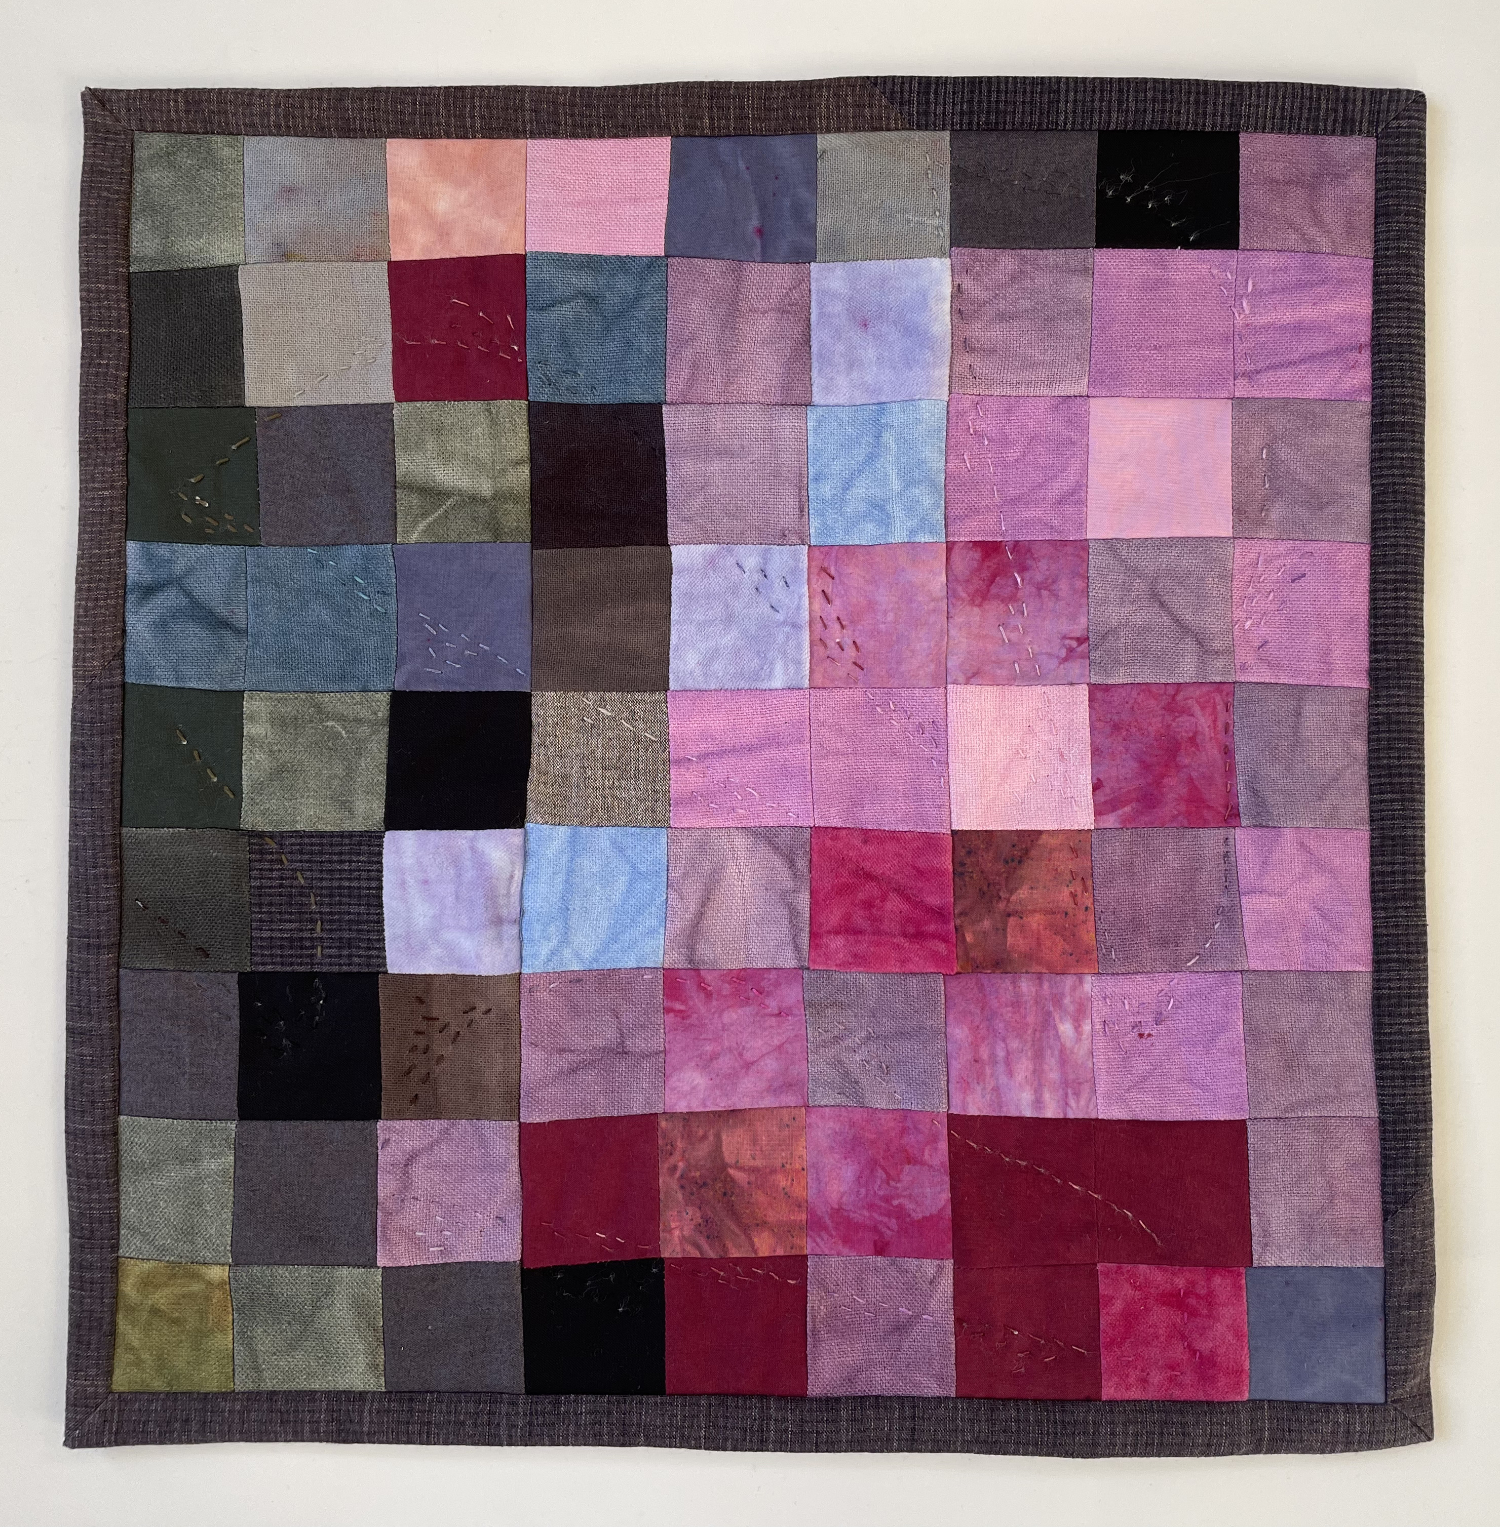 abstract pieced quilt with 9 x 9 squares in magnolia flower colors in the lower right diagonal half